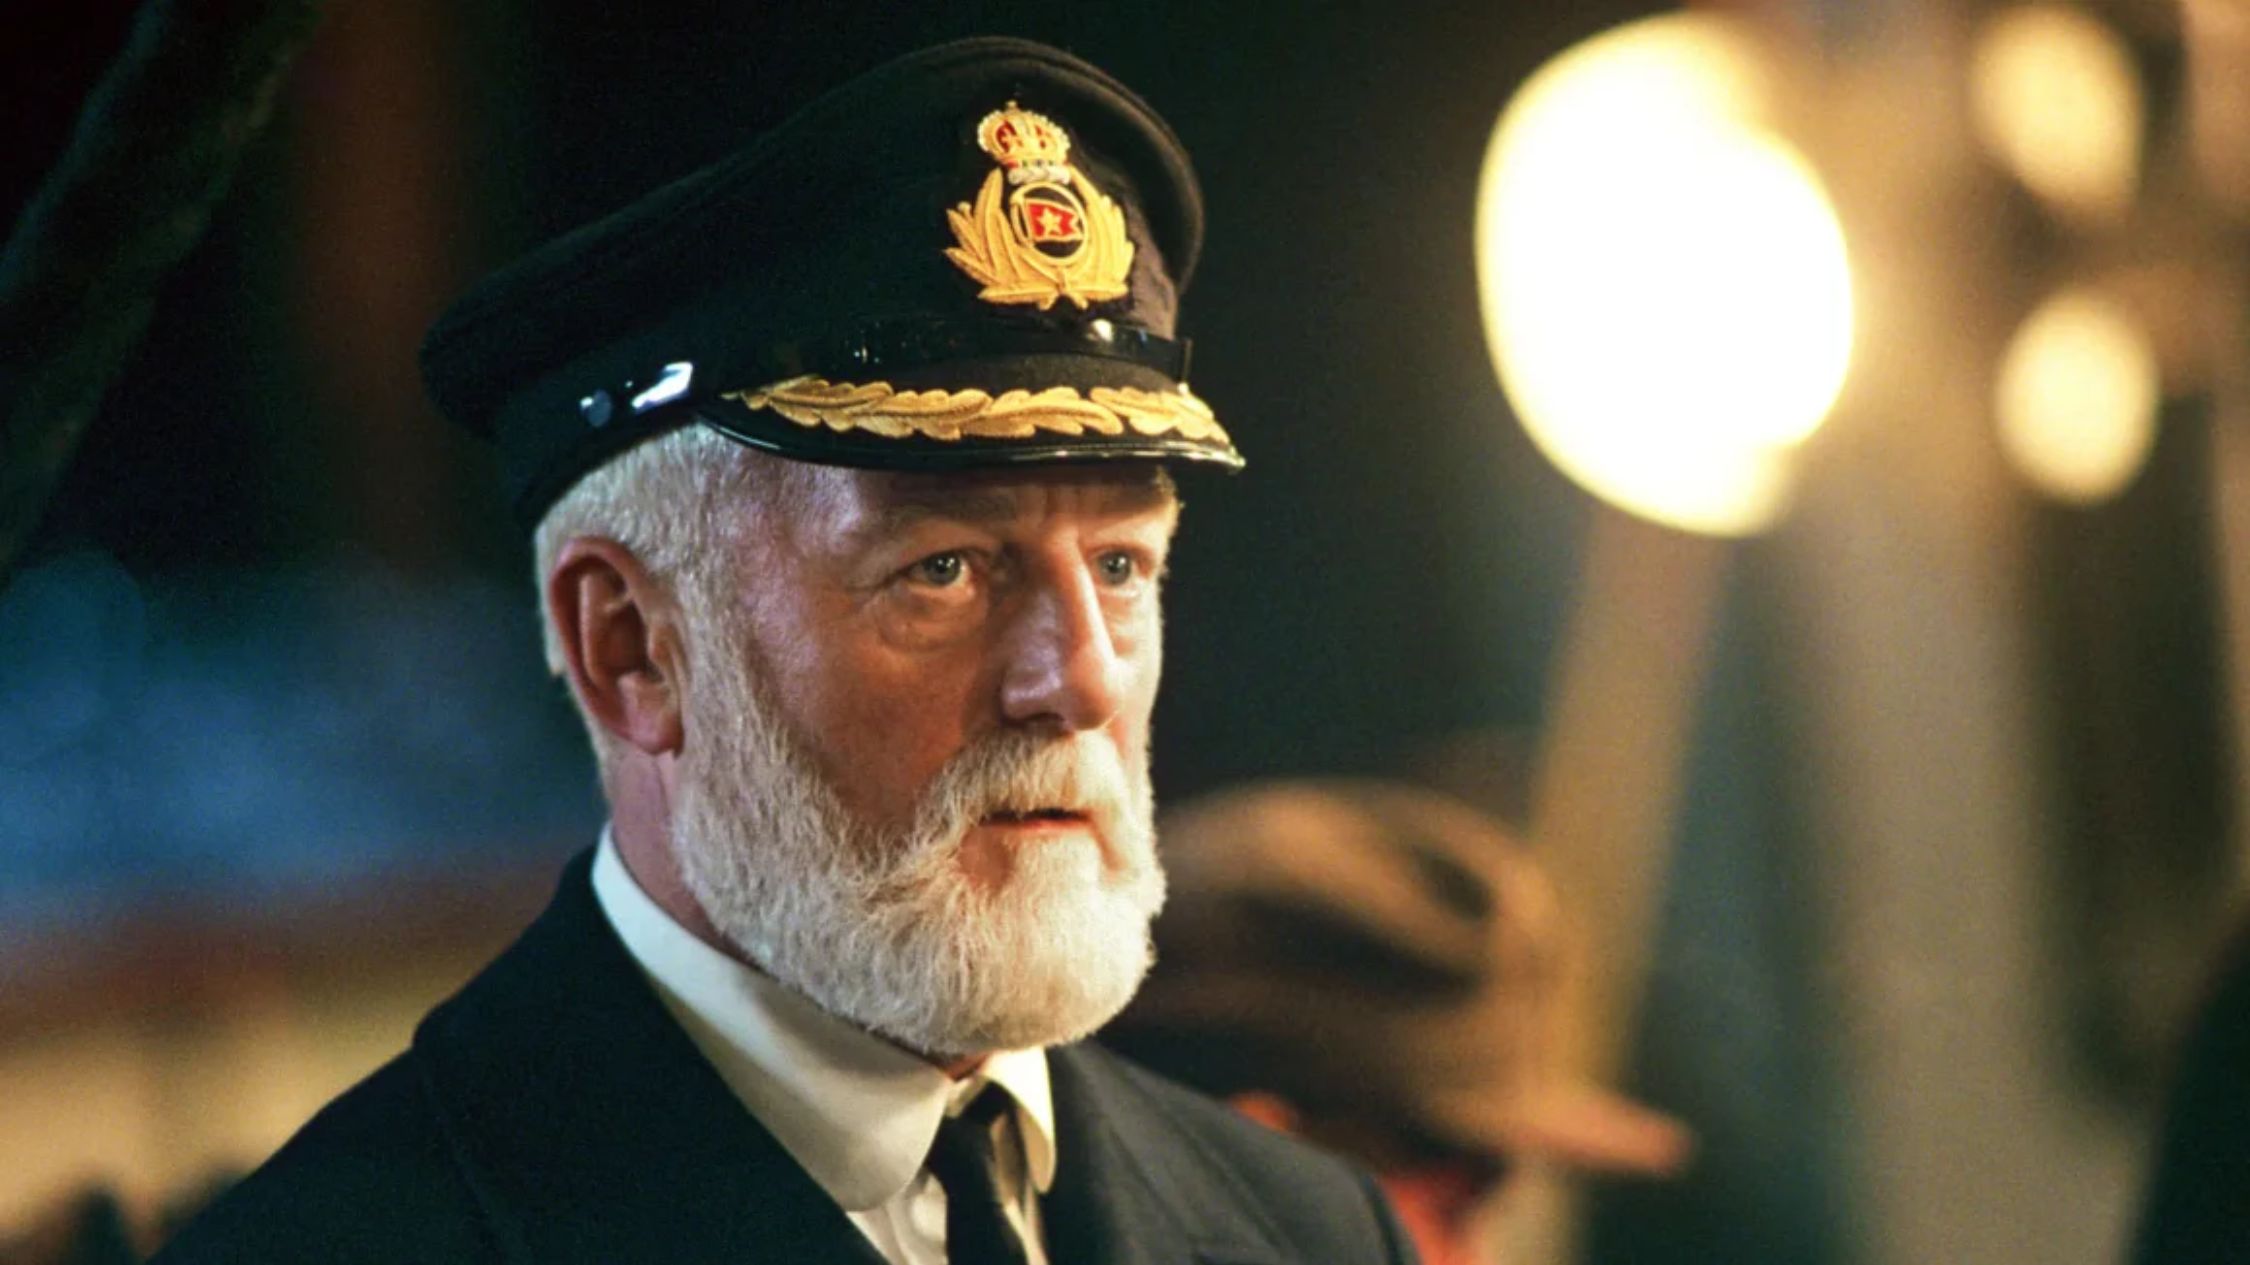 Bernard Hill, actor of “Titanic” and “Lord of the Rings”, dies.